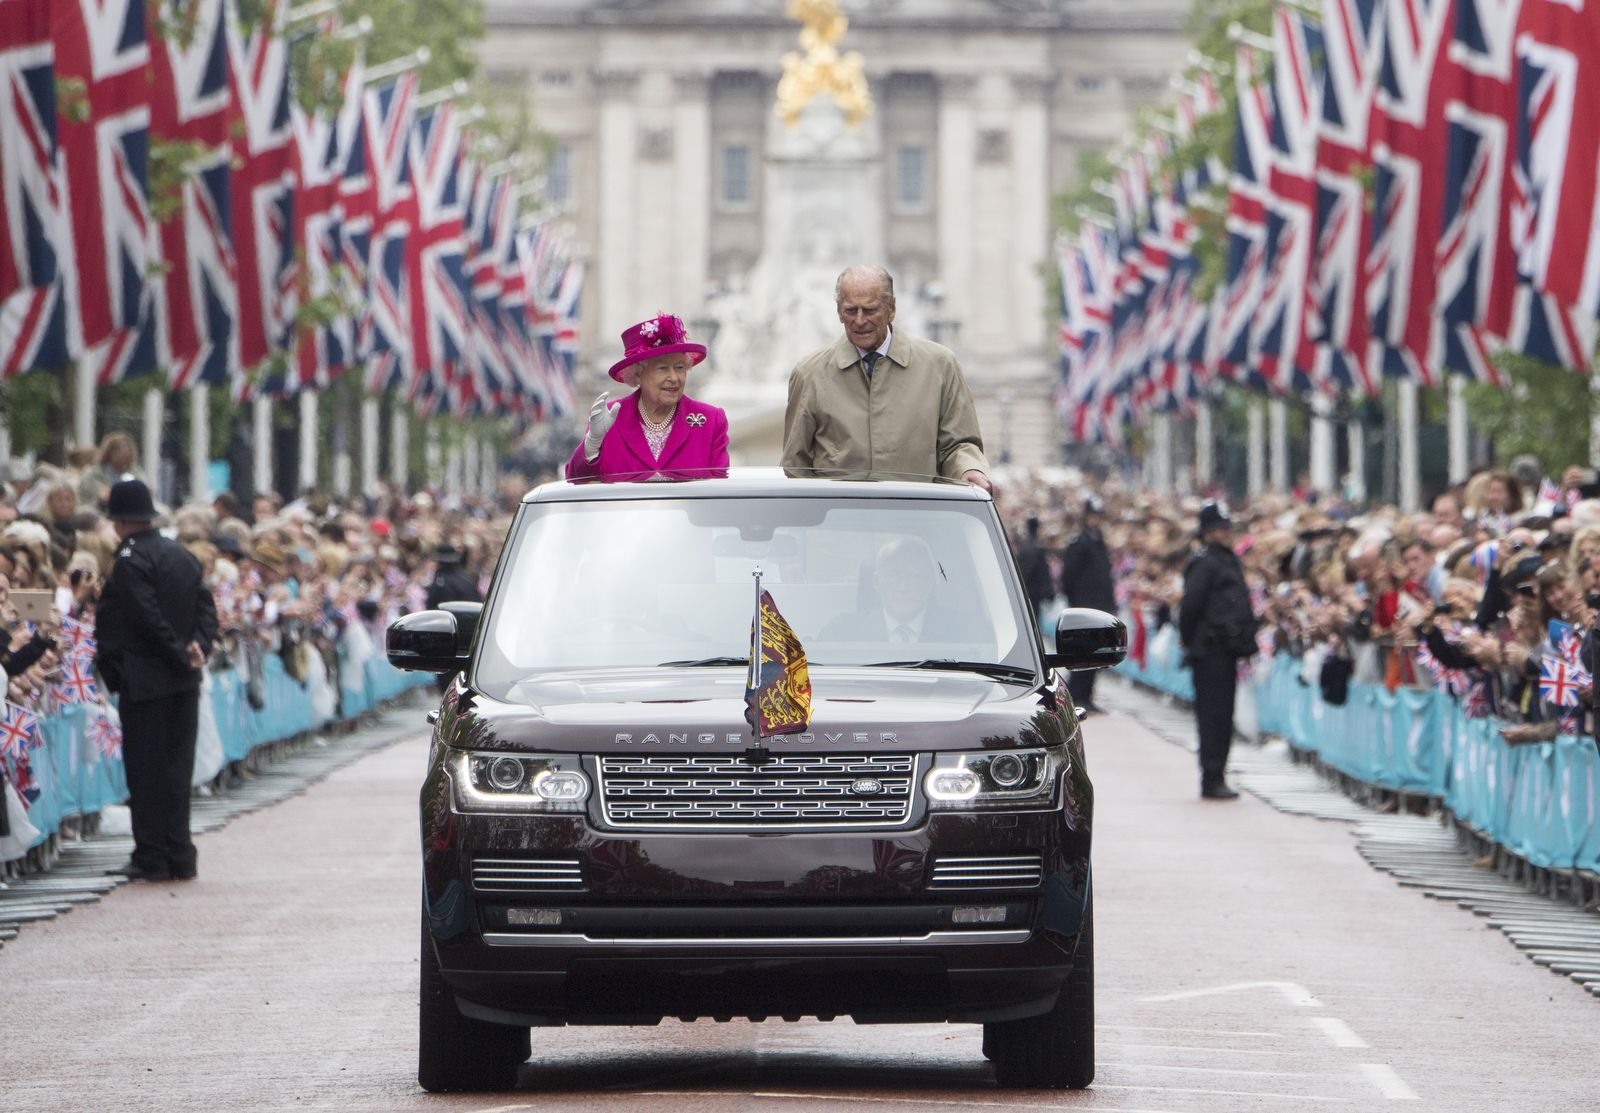 The Queen and Prince Philip wave to guests in London attending her 90th birthday celebrations in 2016. Photo: Getty